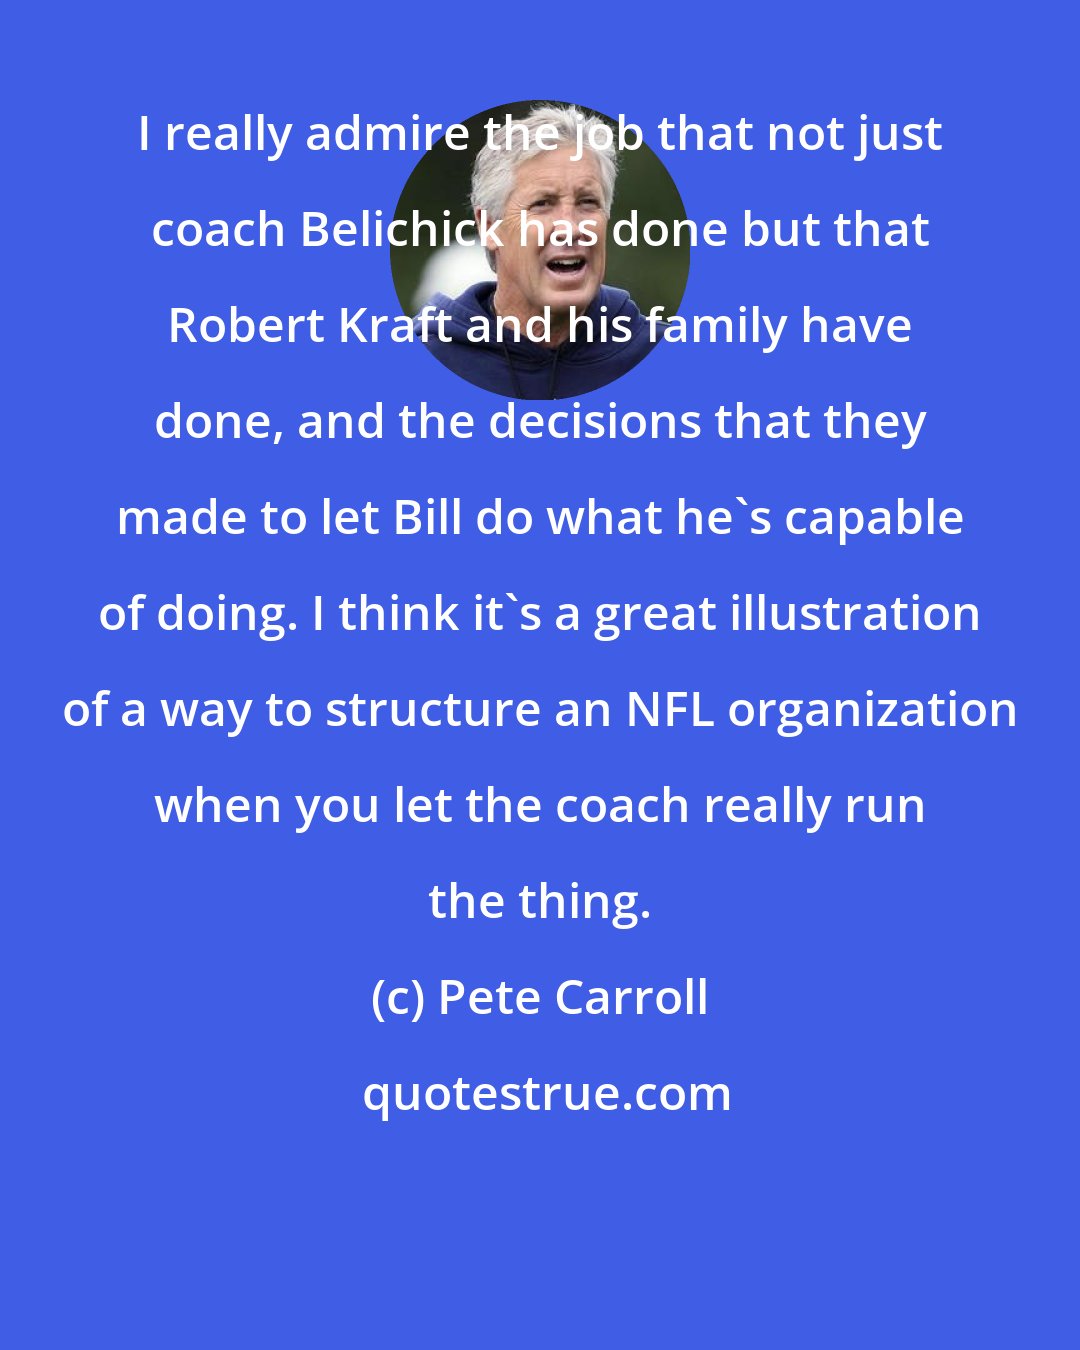 Pete Carroll: I really admire the job that not just coach Belichick has done but that Robert Kraft and his family have done, and the decisions that they made to let Bill do what he's capable of doing. I think it's a great illustration of a way to structure an NFL organization when you let the coach really run the thing.